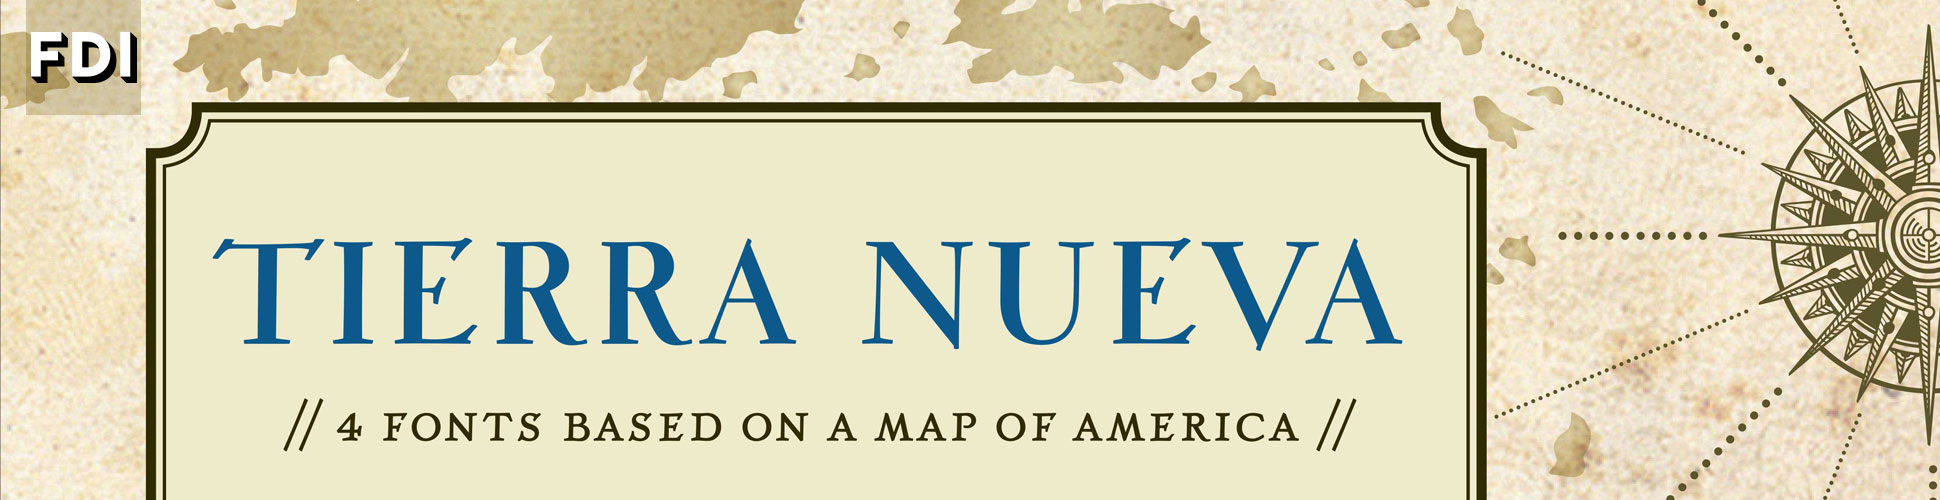 Tierra Nueva: 4 fonts based on a map of America